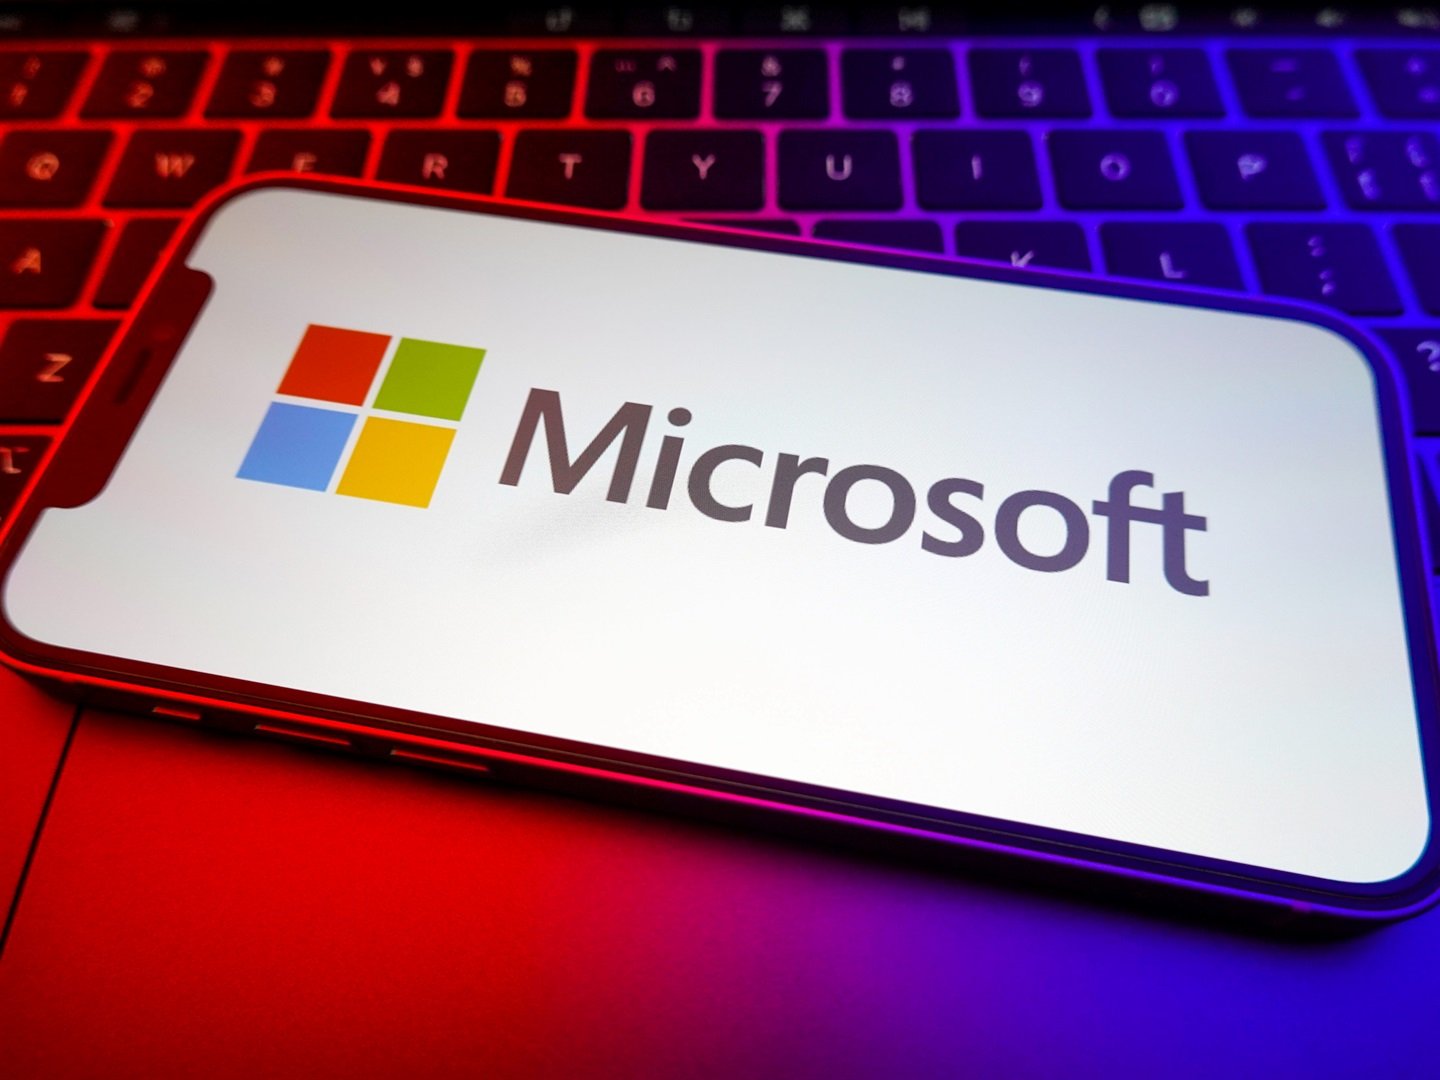 News24 | SA watchdog to hit Microsoft with complaint over alleged abuse of market power, sources say